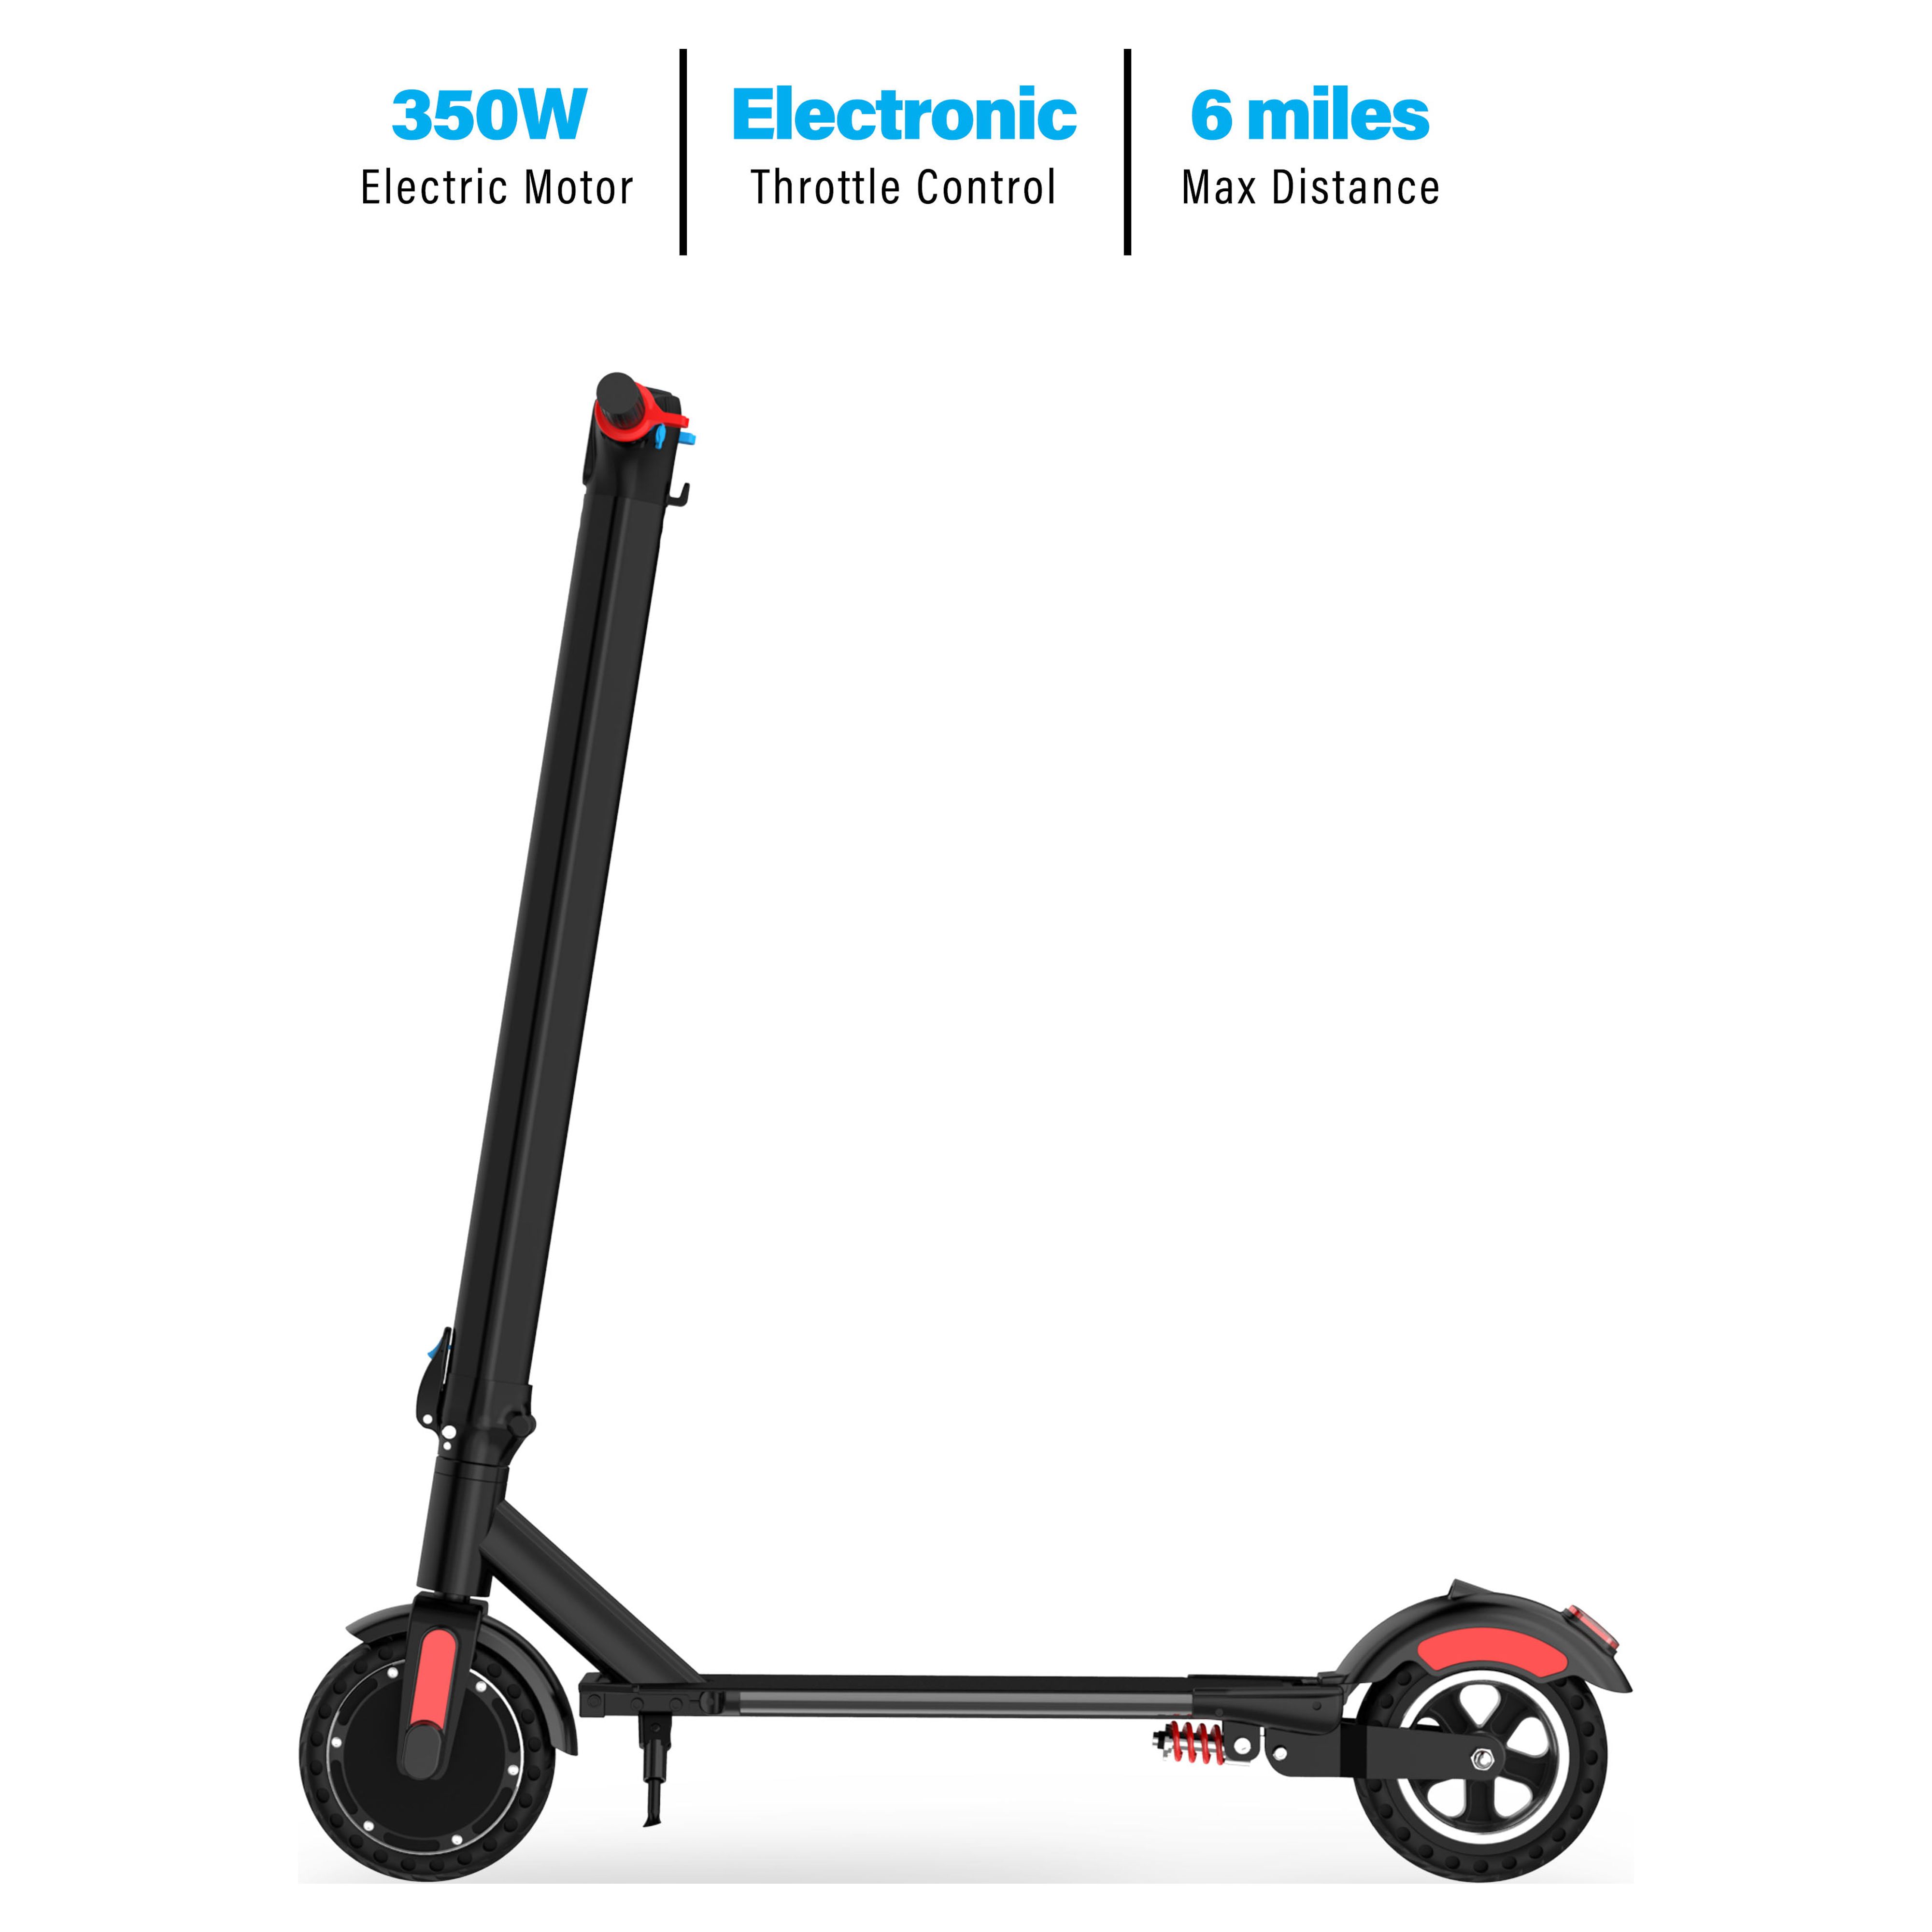 Hover-1 Eagle Electric Folding Scooter for Adults,15 mph Max Speed, LED Headlight, UL 2272 Certified - image 4 of 14